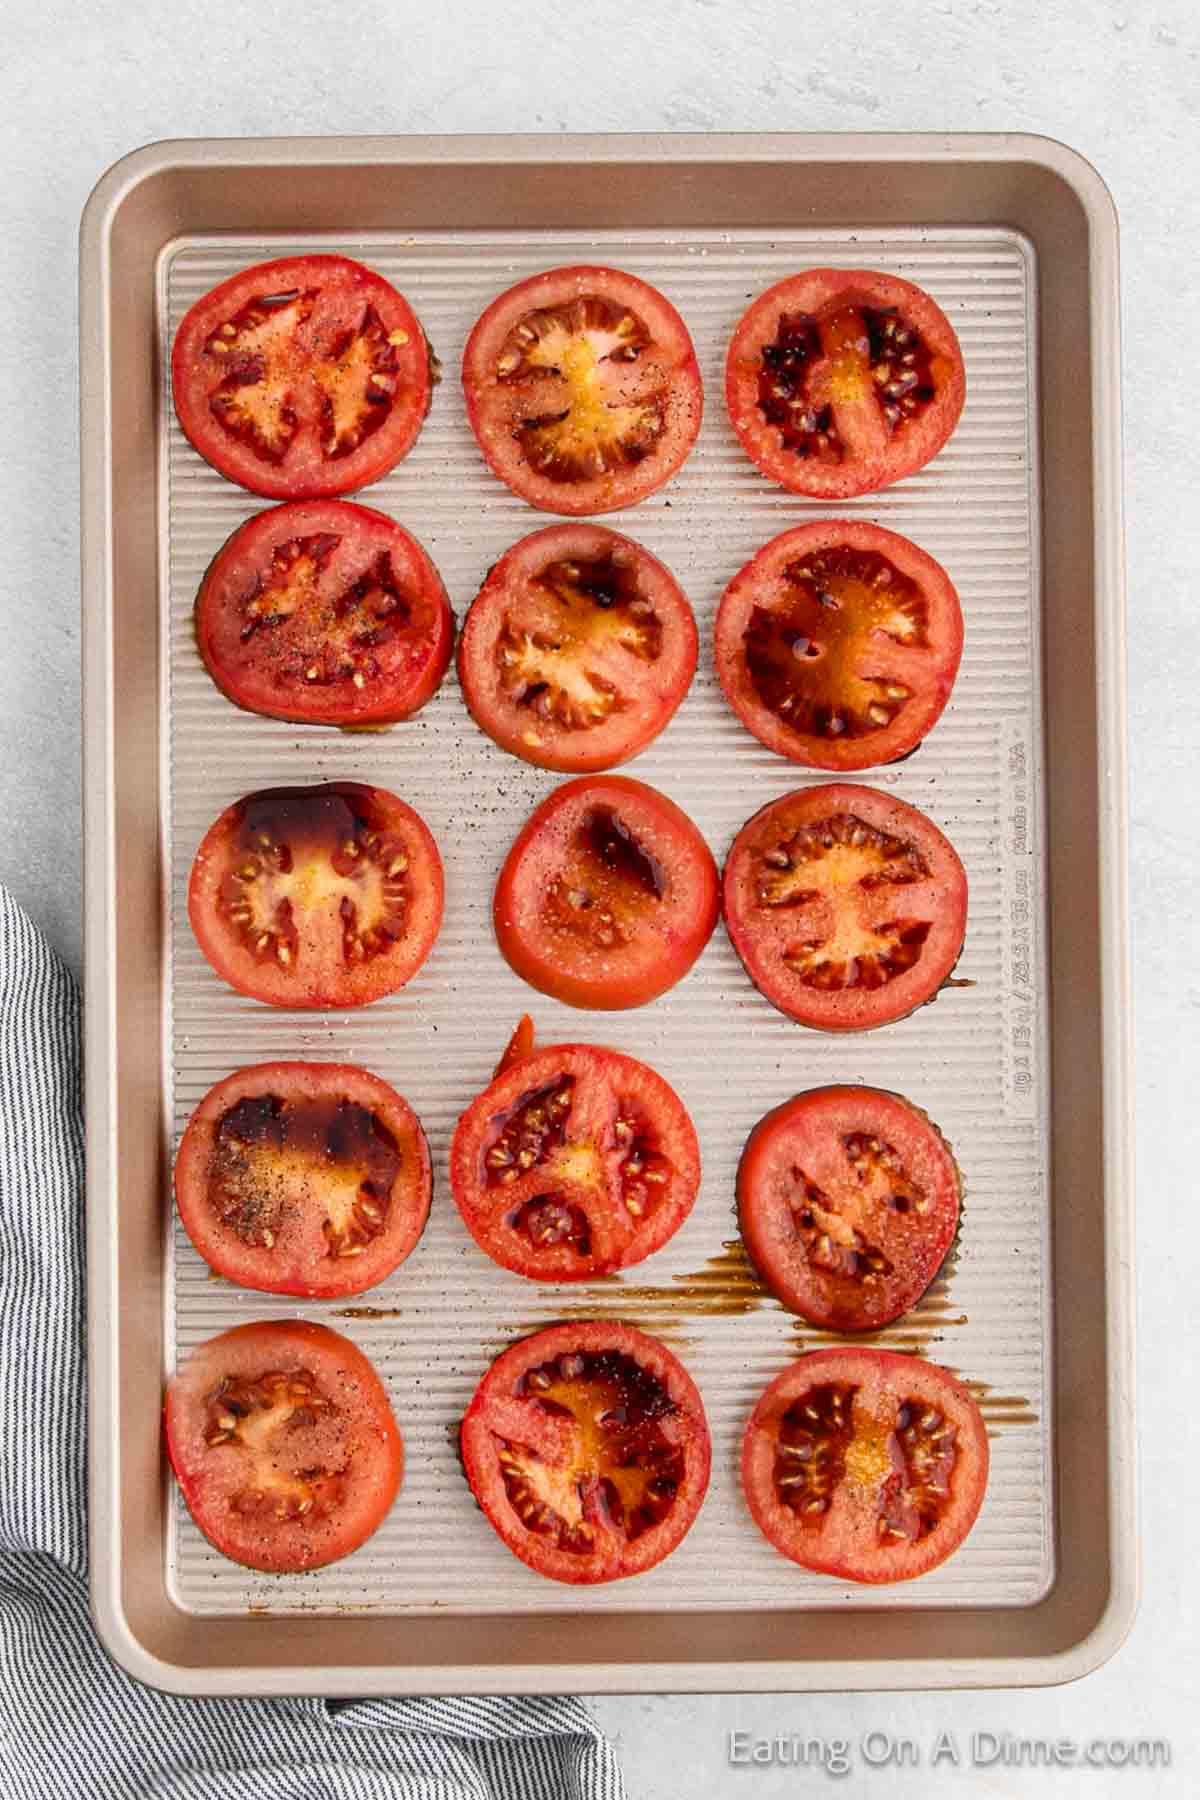 Placing the slice tomatoes on a baking sheet